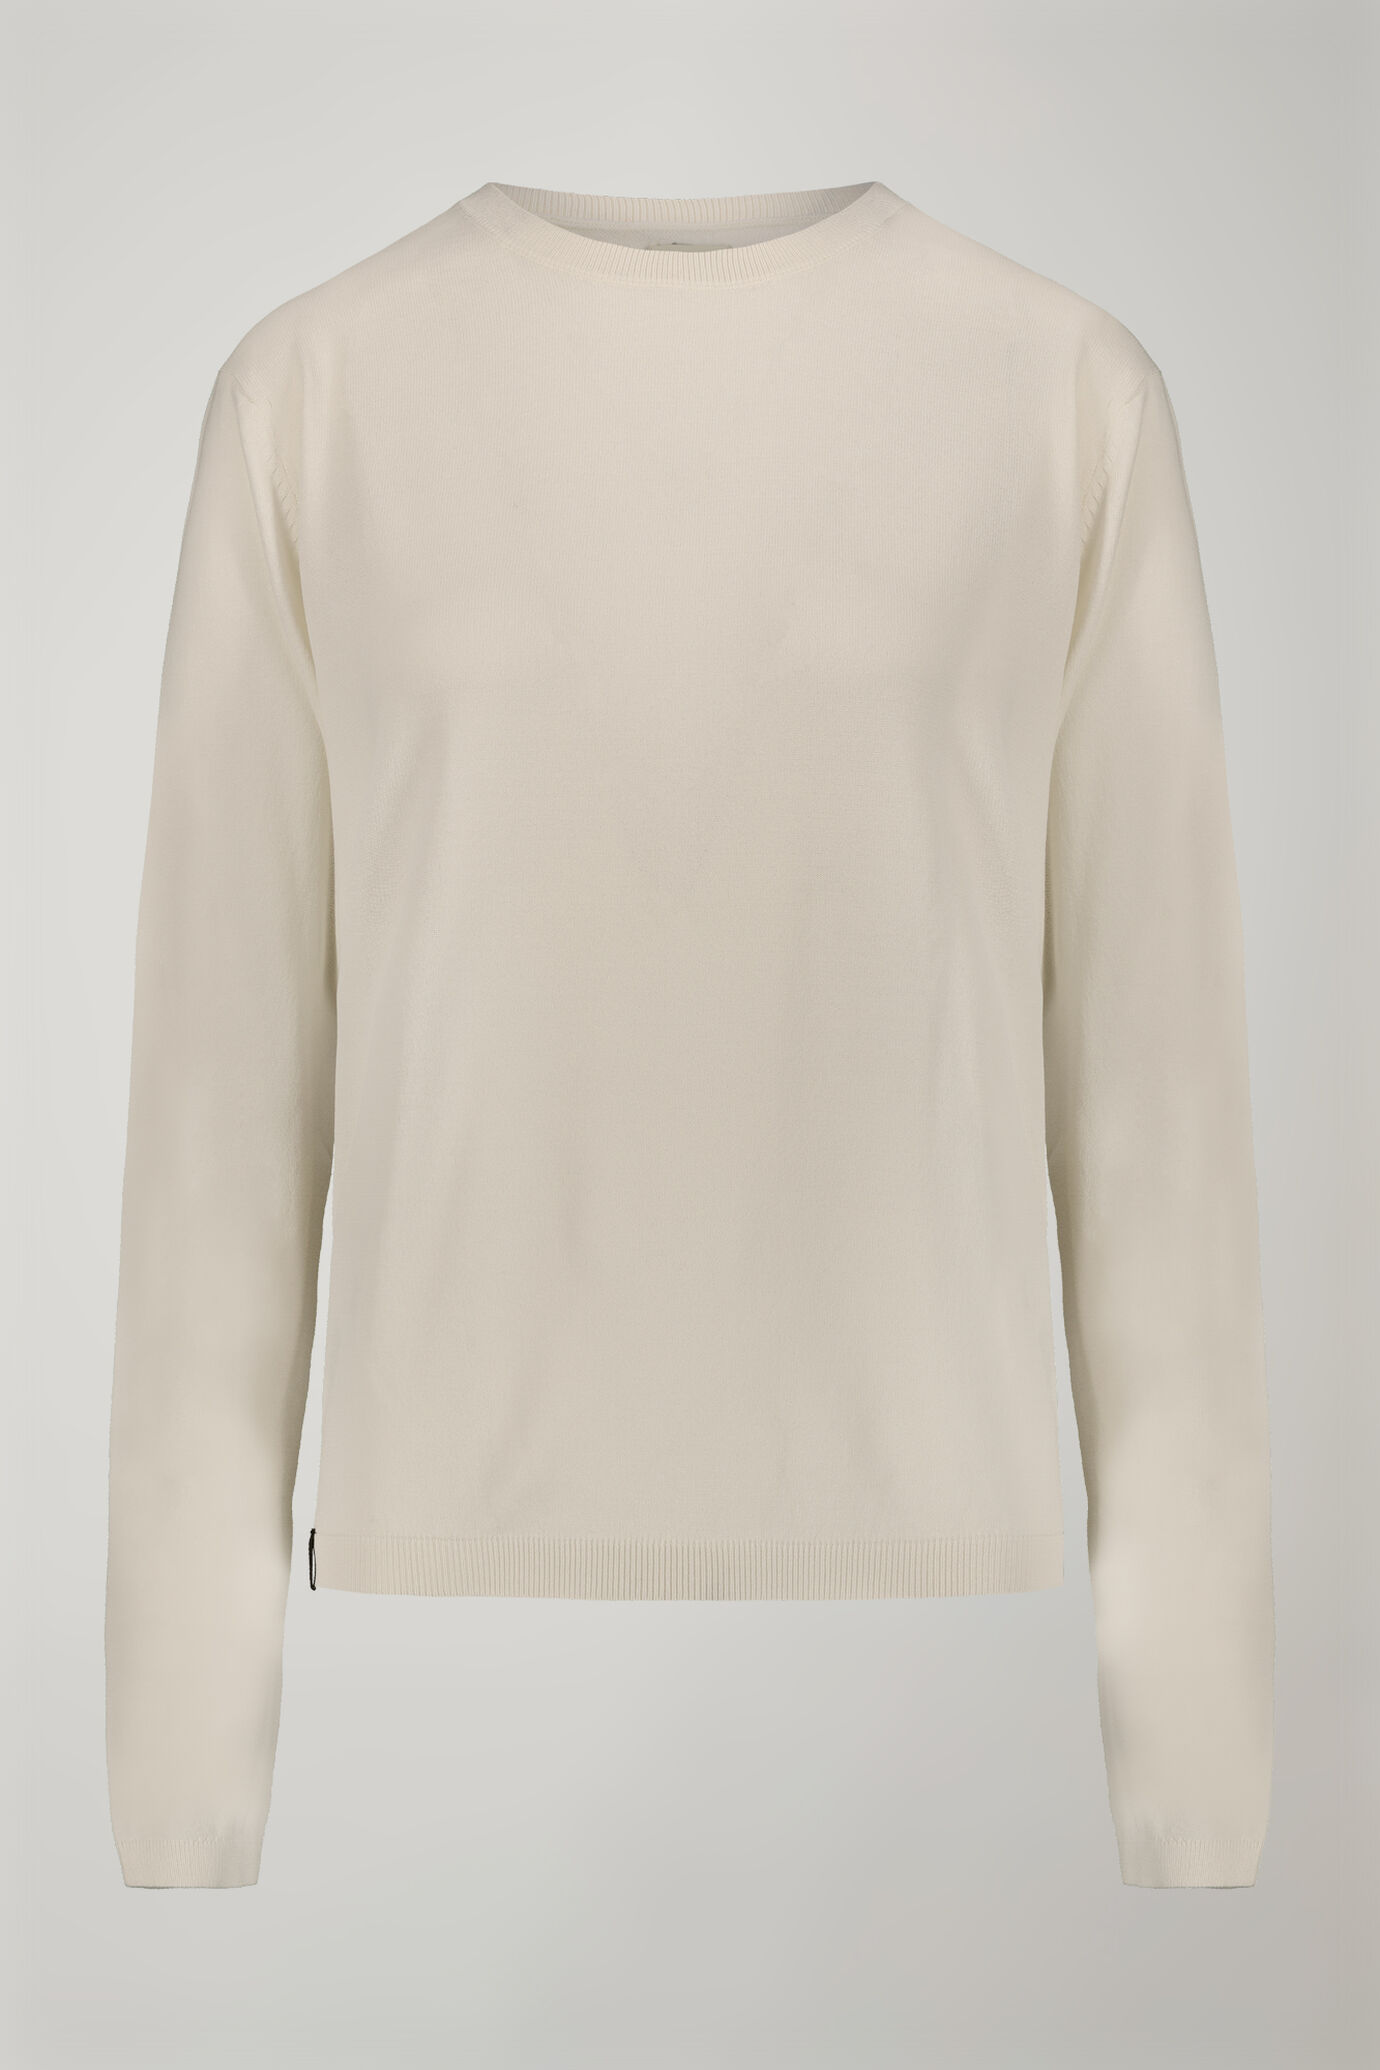 Women’s round neck sweater regular fit image number 5